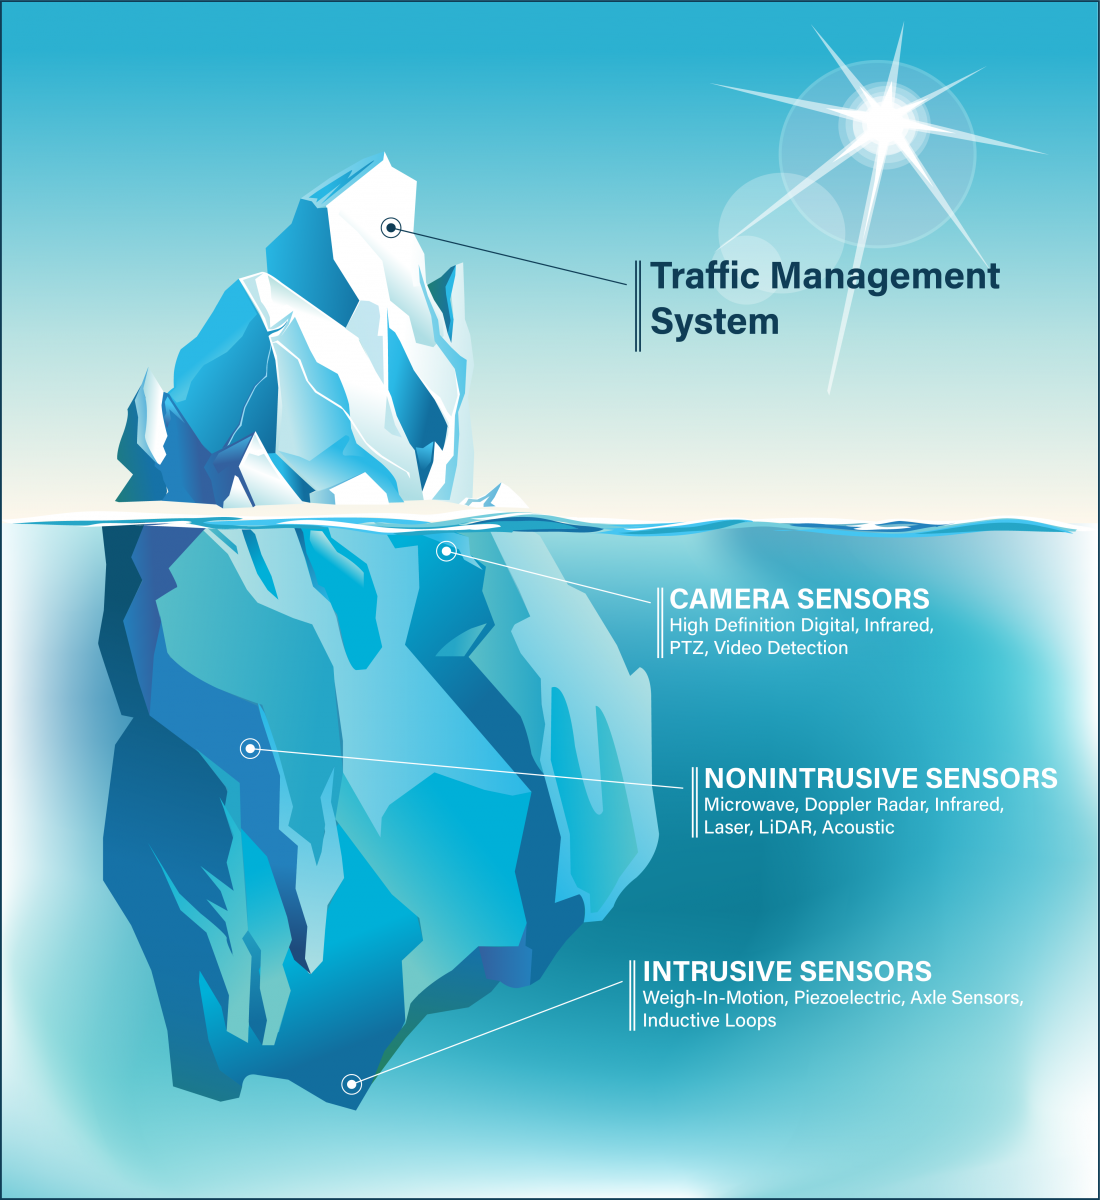 Traffic Sensors are the Foundation of the Traffic Management System